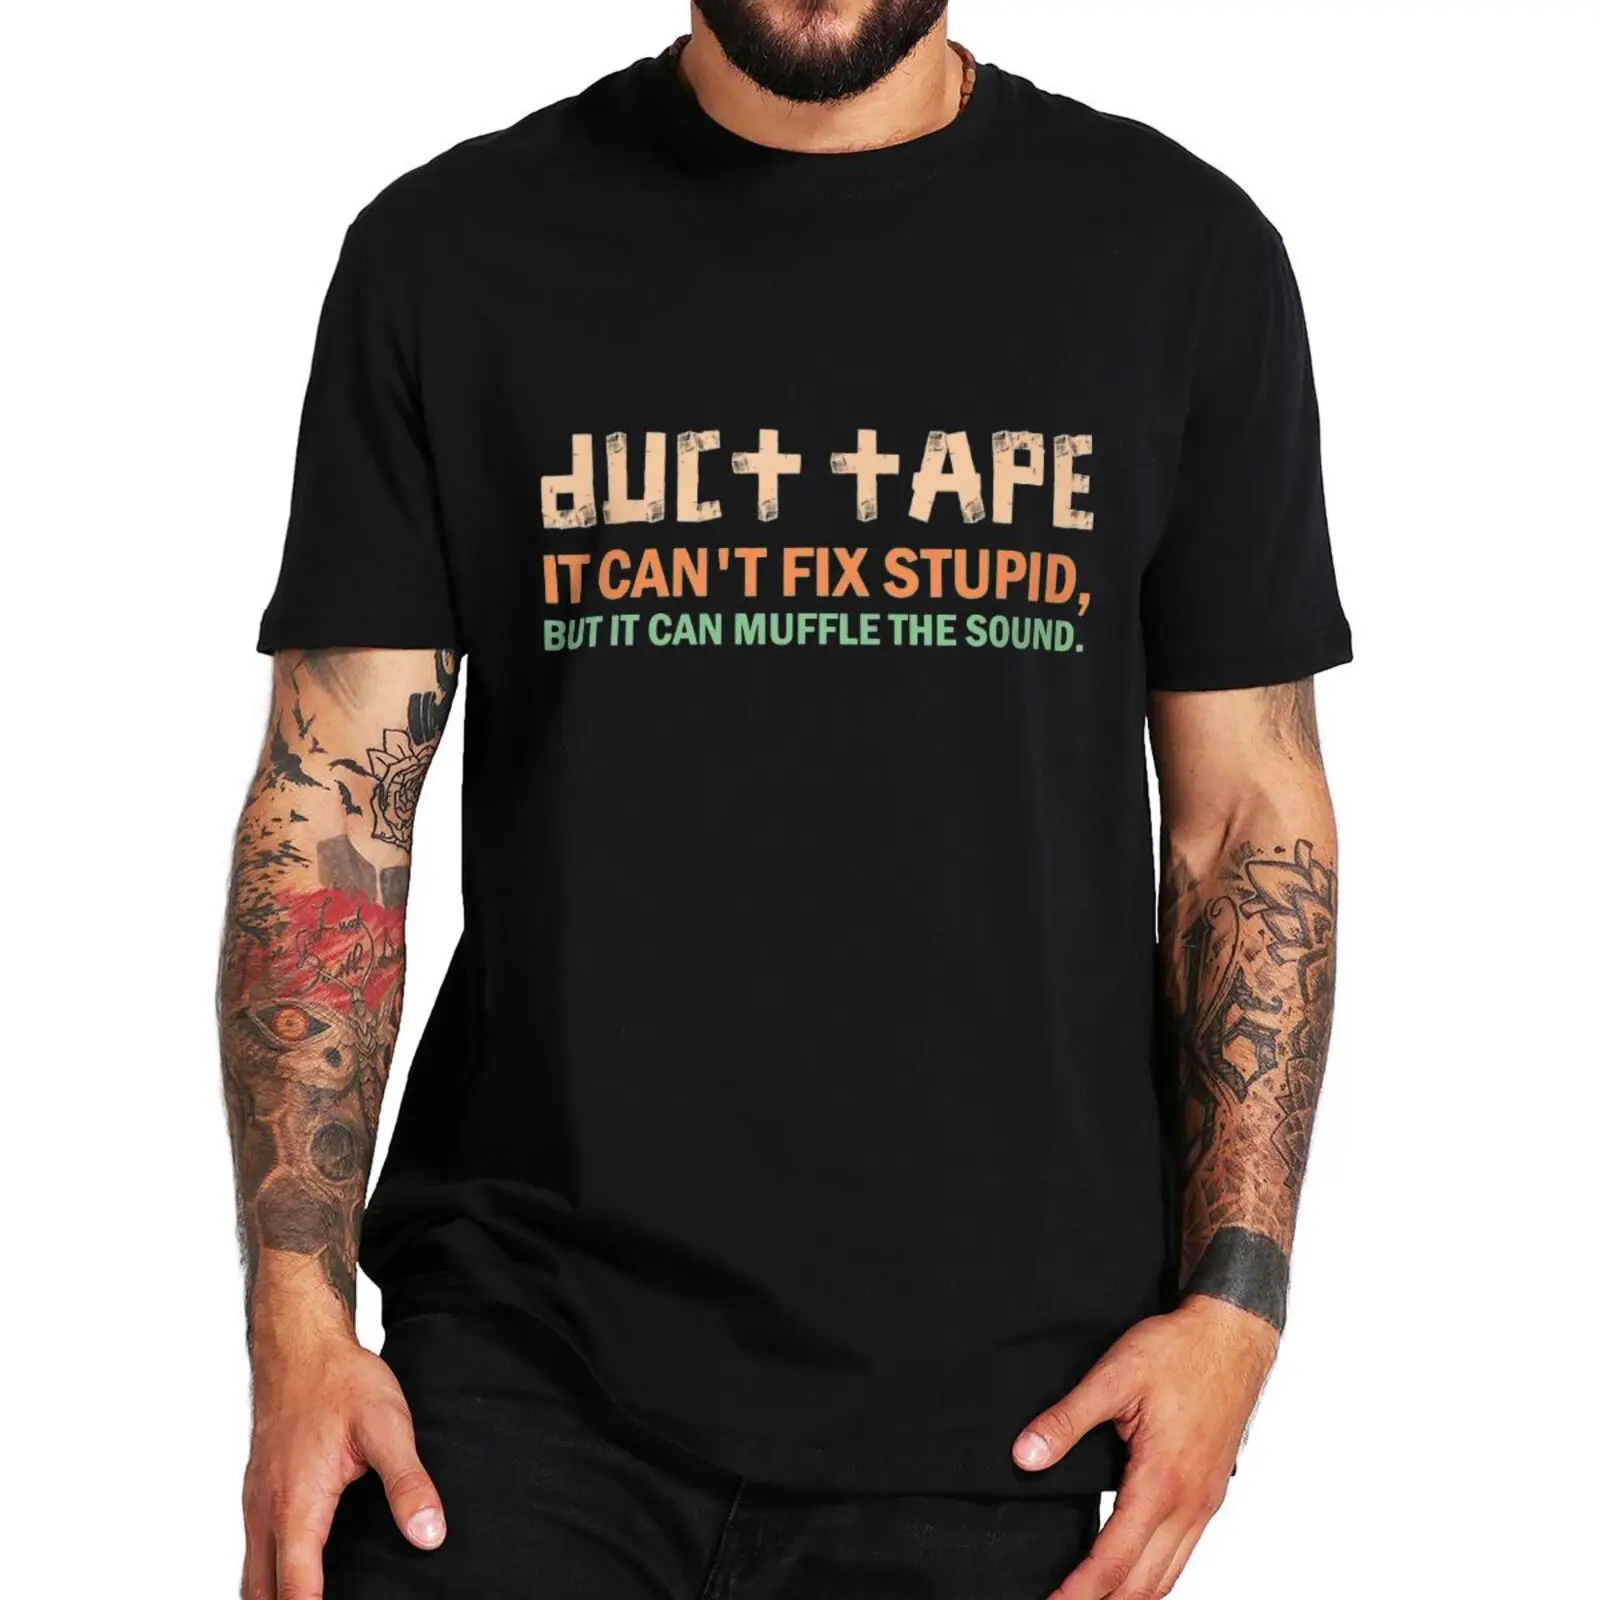 

Duct Tape It Can't Fix Stupid But It Can Muffle The Sound T Shirt Funny Adult Humor Vintage T-shirt Casual Cotton Unisex Tee Top